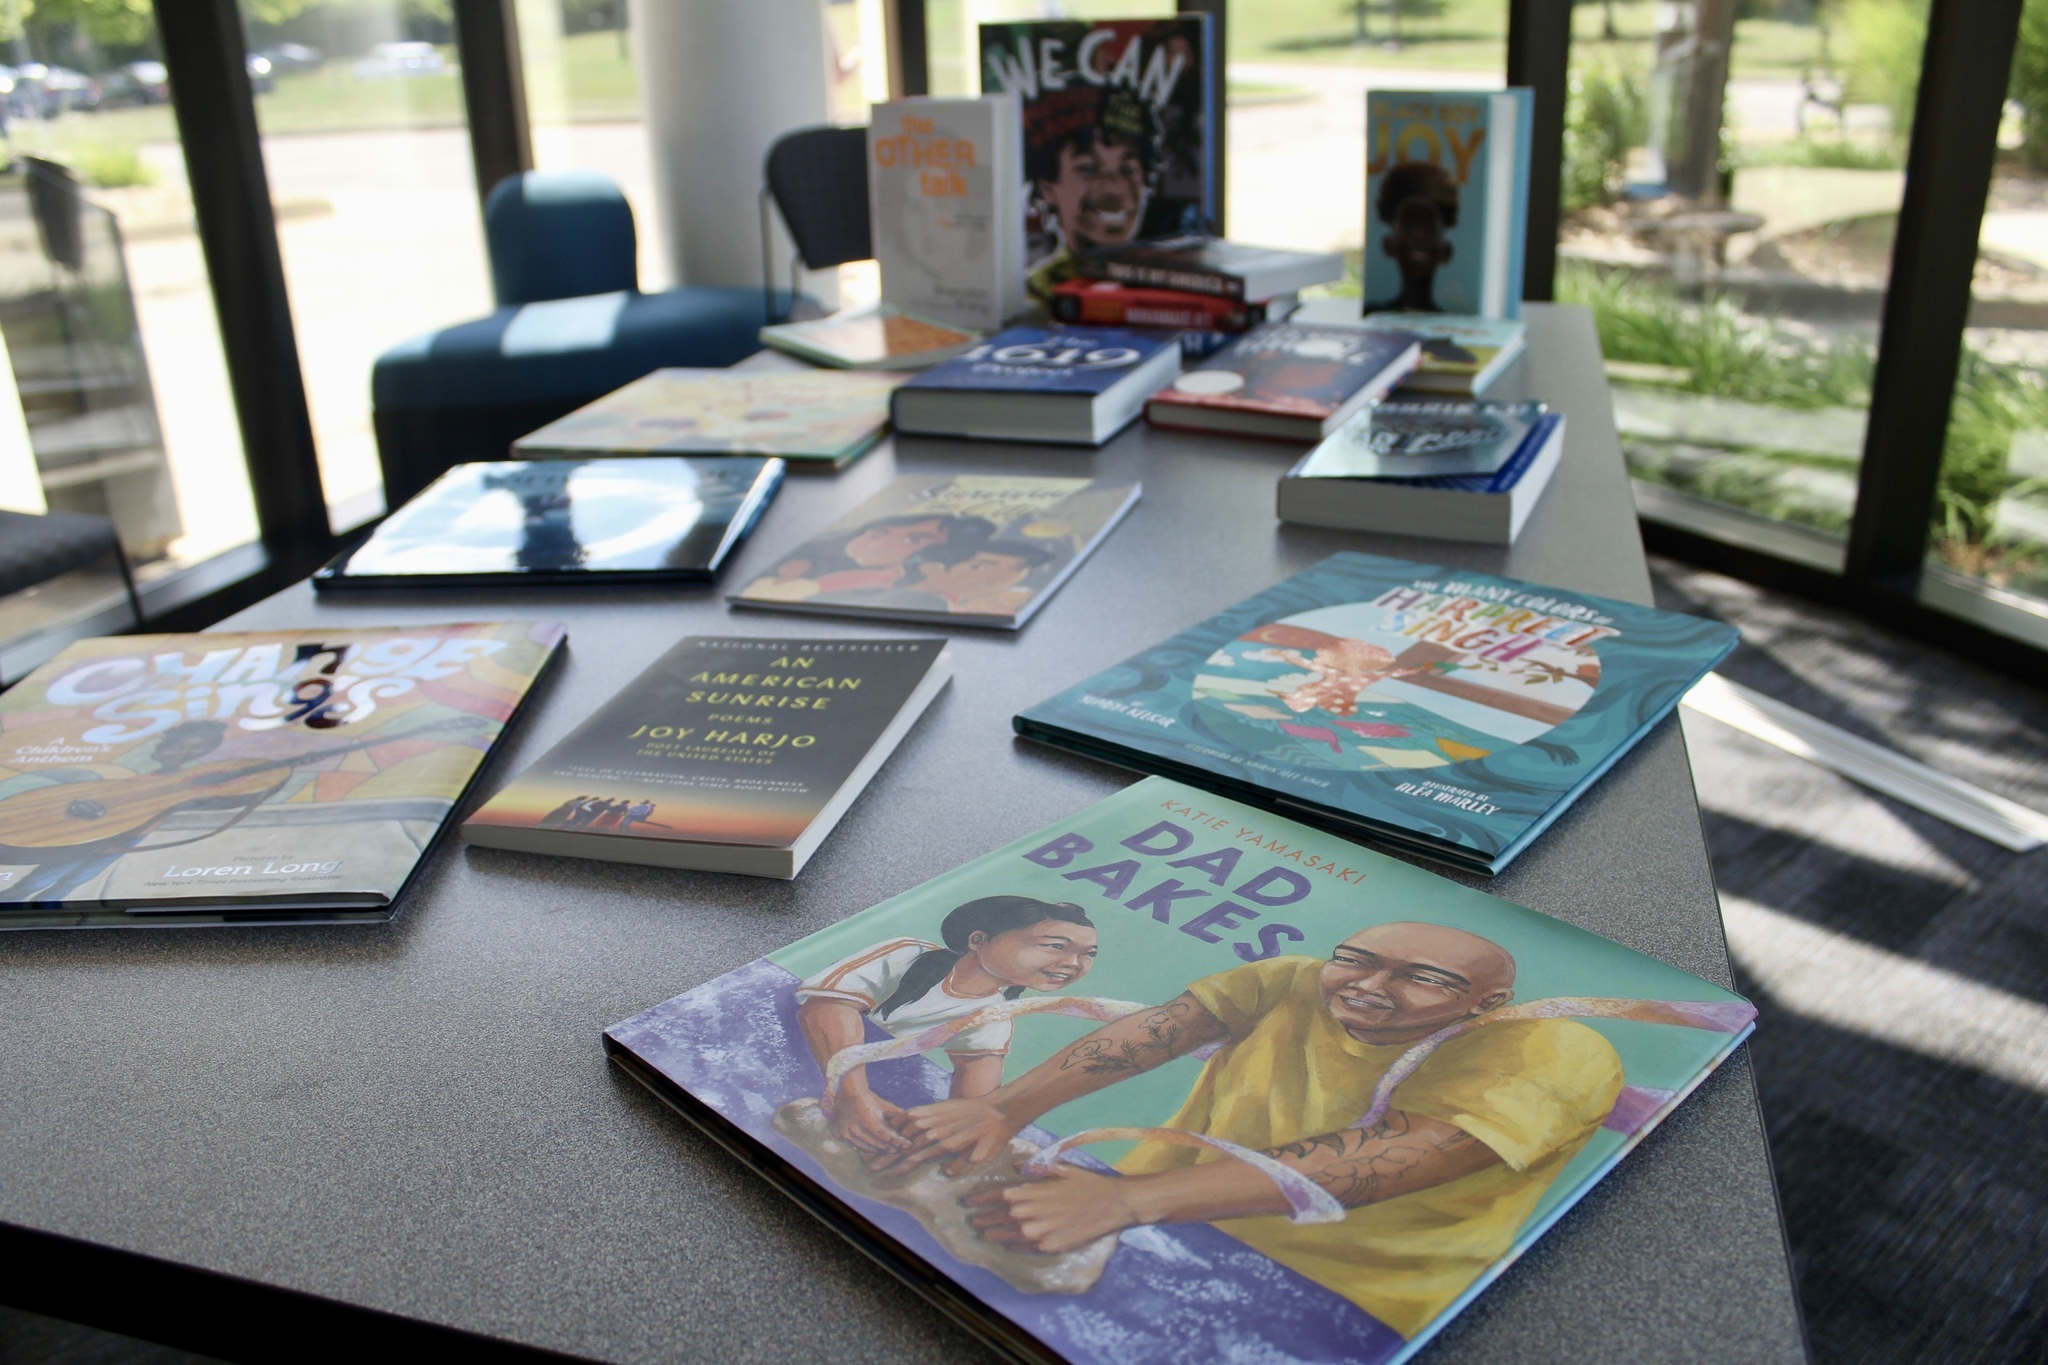 Books about diverse stories are displayed laying flat on a table.